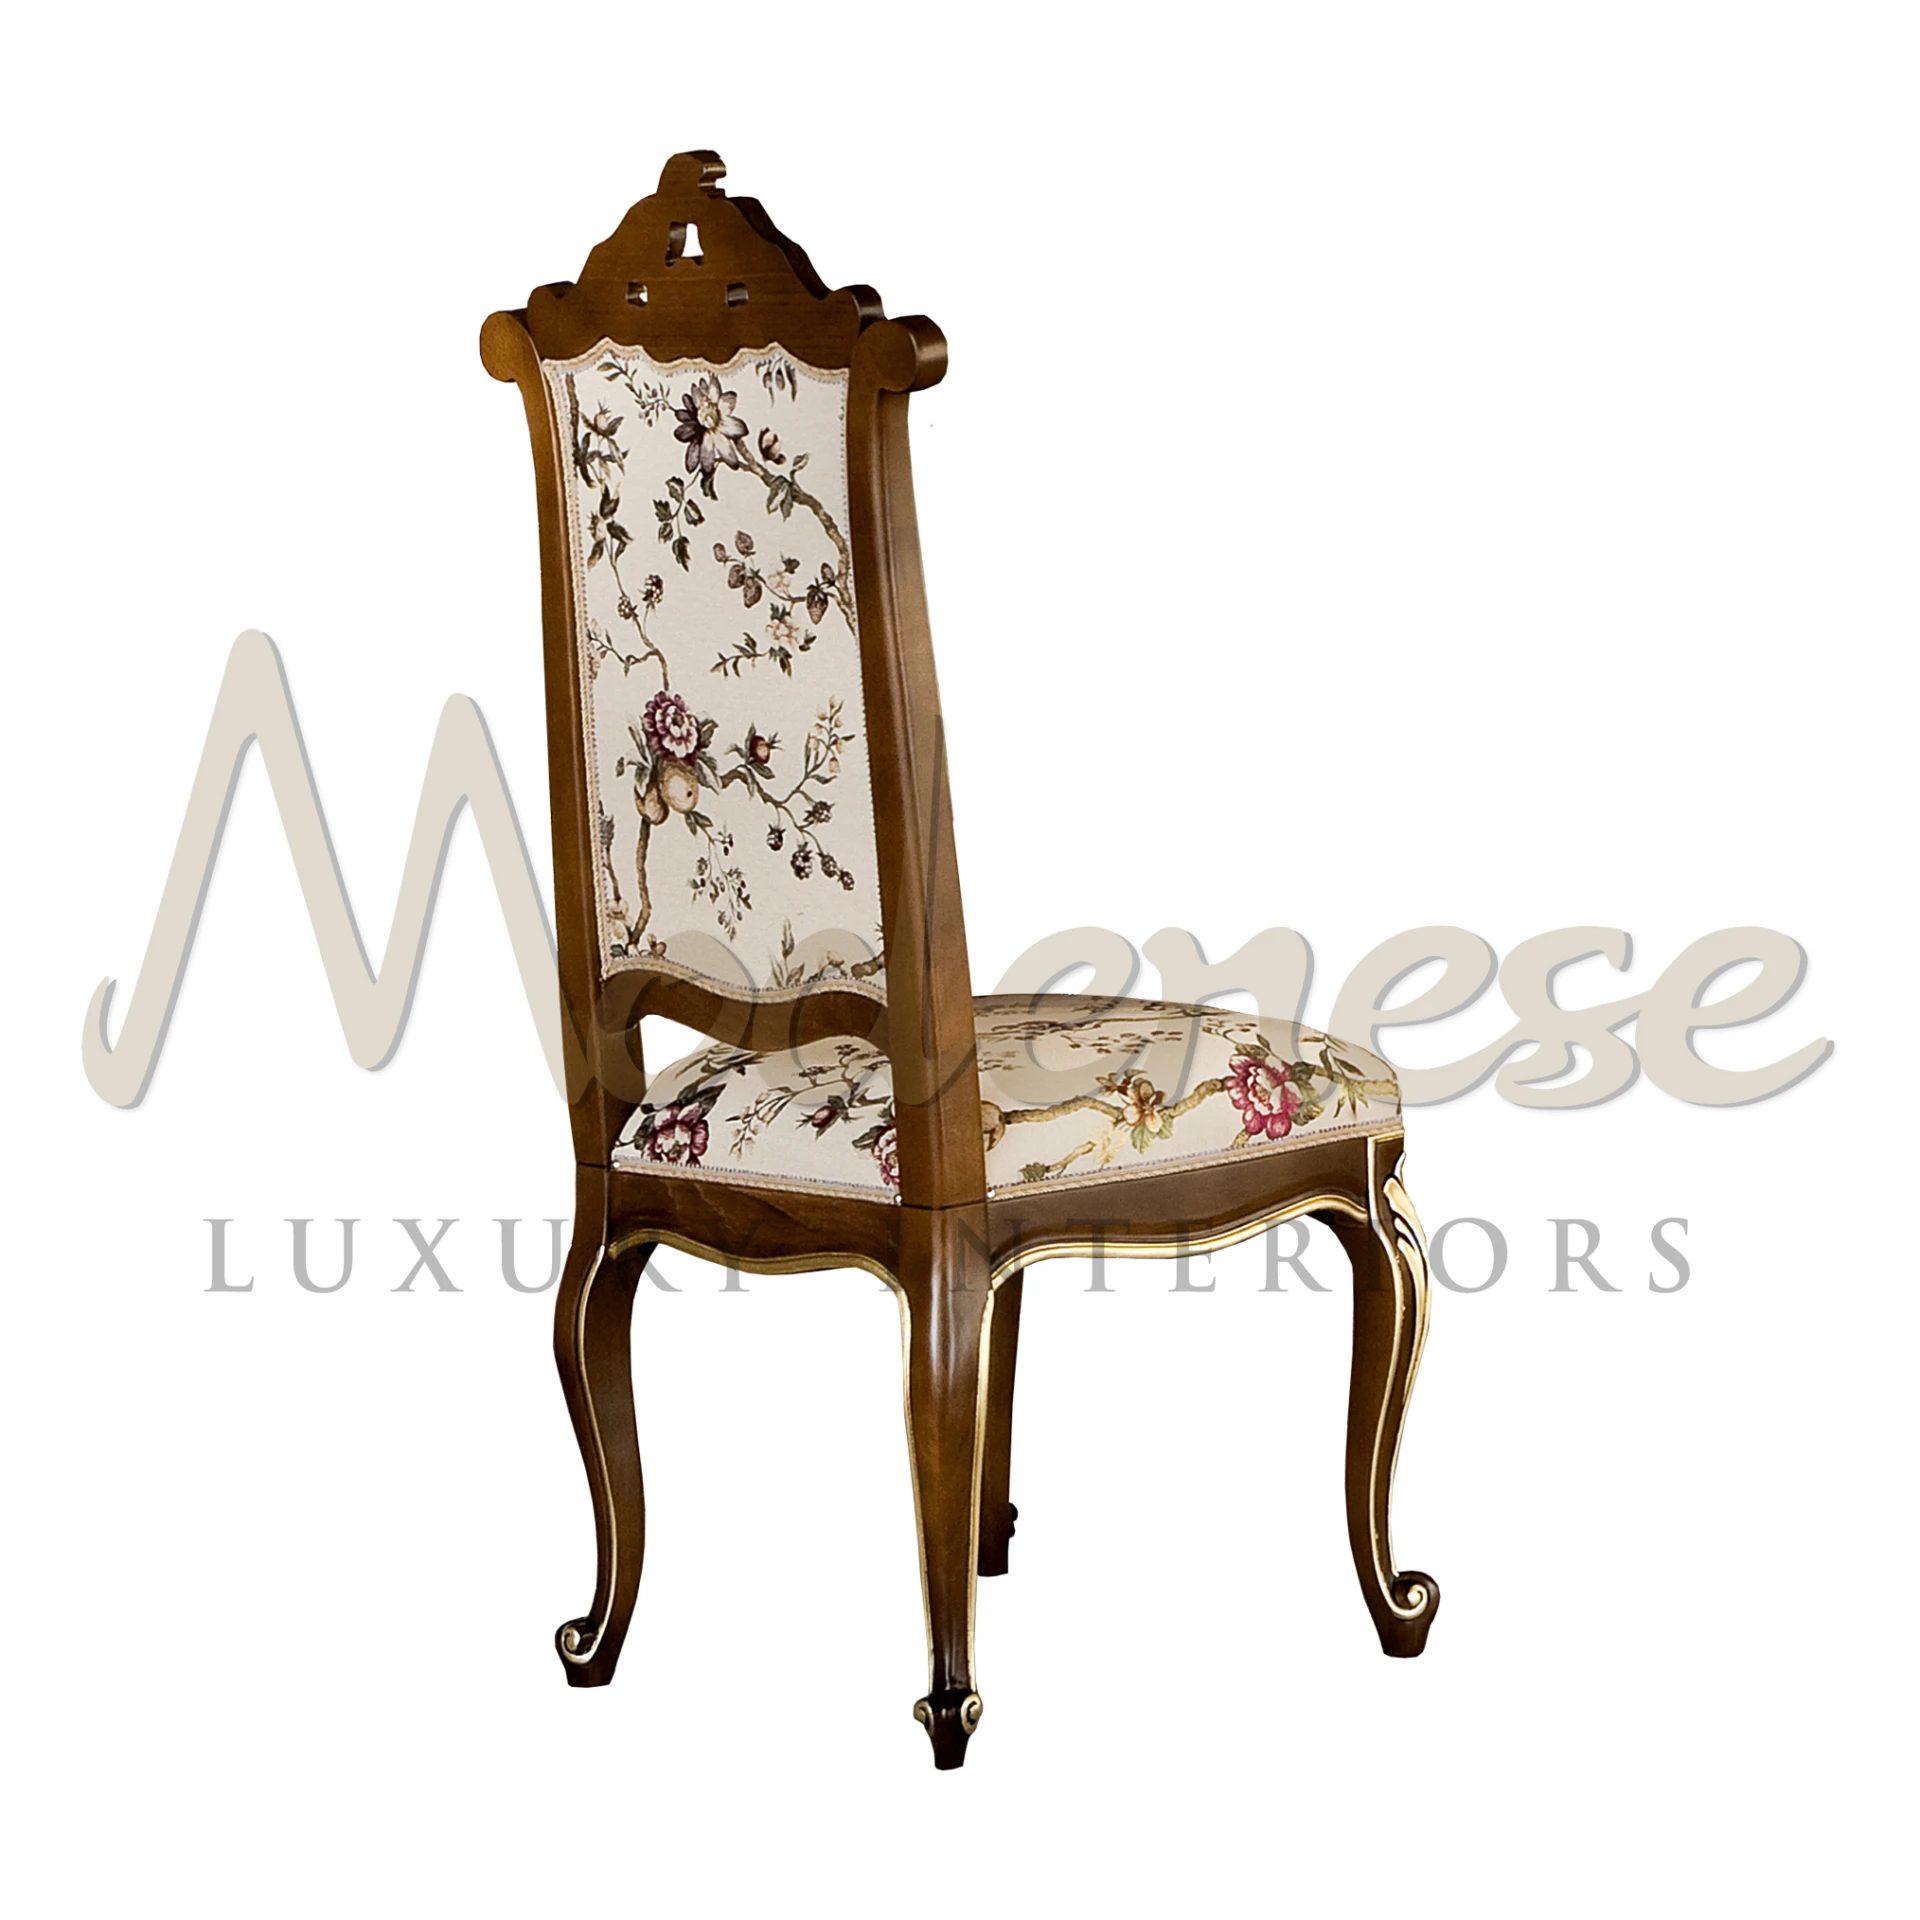 Discover high-end palaces with Modenese Furniture's mission. This chair features a classic walnut finish, gold leaf details, and floral-patterned upholstery.